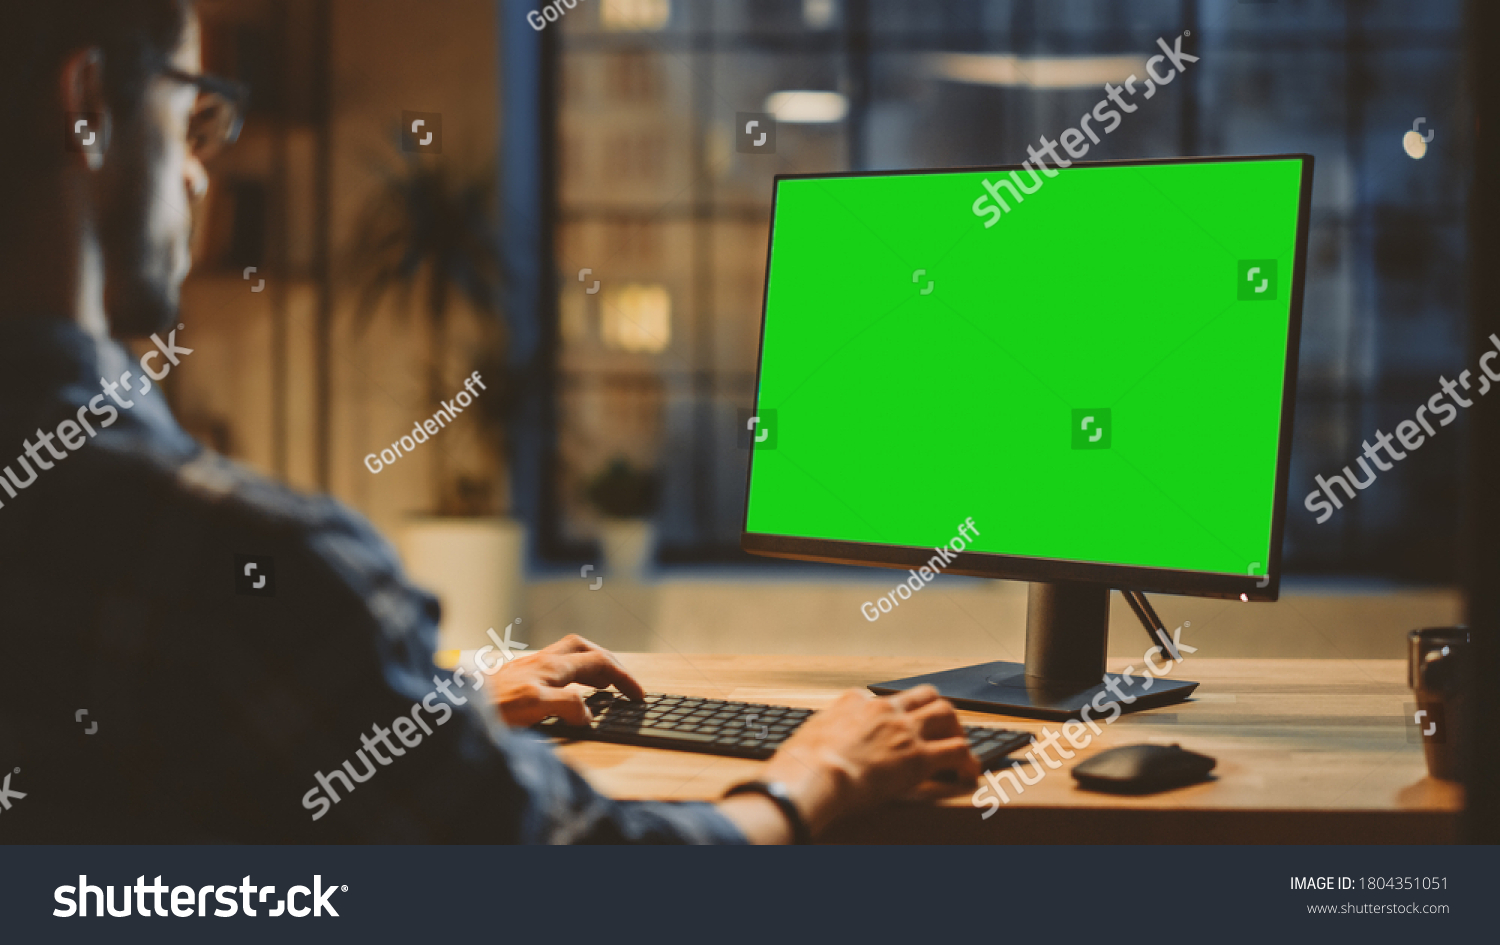 Over the Shoulder: Creative Young Man Sitting at His Desk Using Desktop Computer with Mock-up Green Screen. Evening in the Stylish Office Studio with City Window View #1804351051